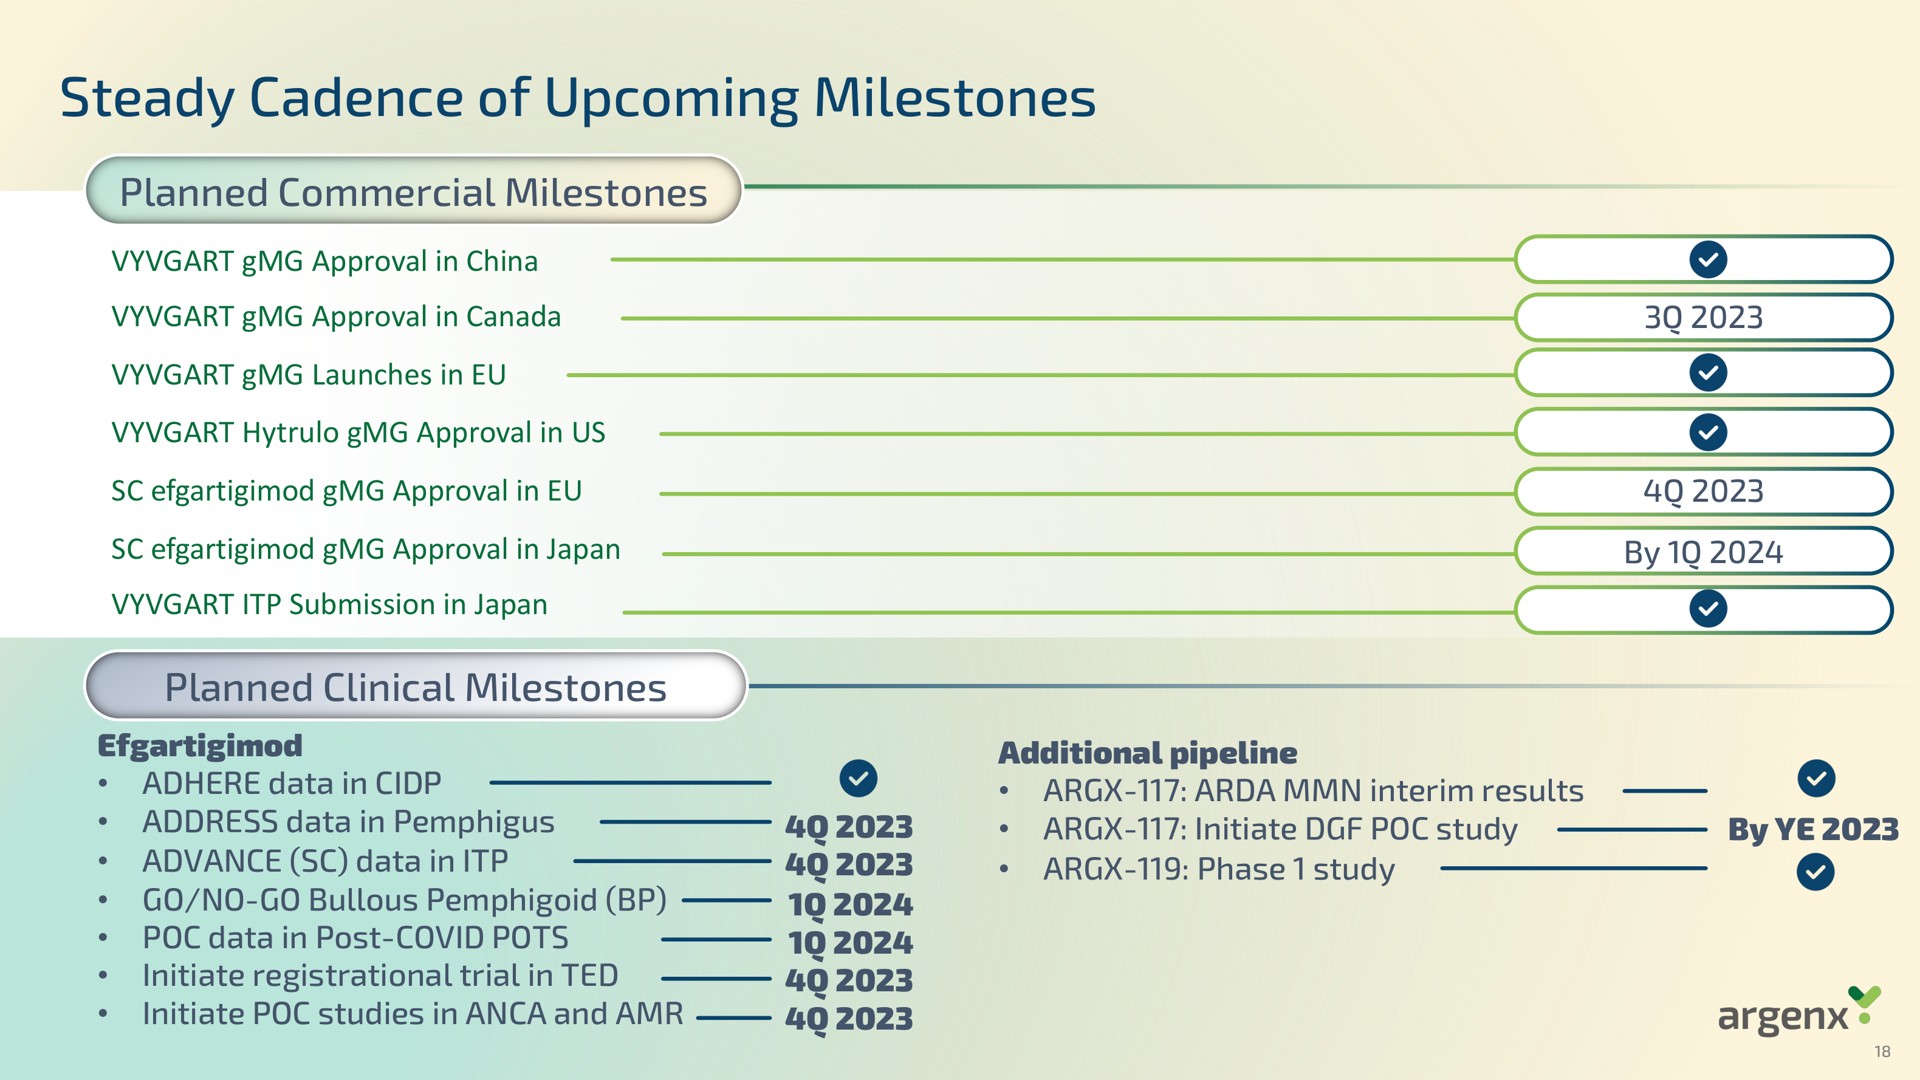 steady cadence of upcoming milestones approval in us | argenx SE